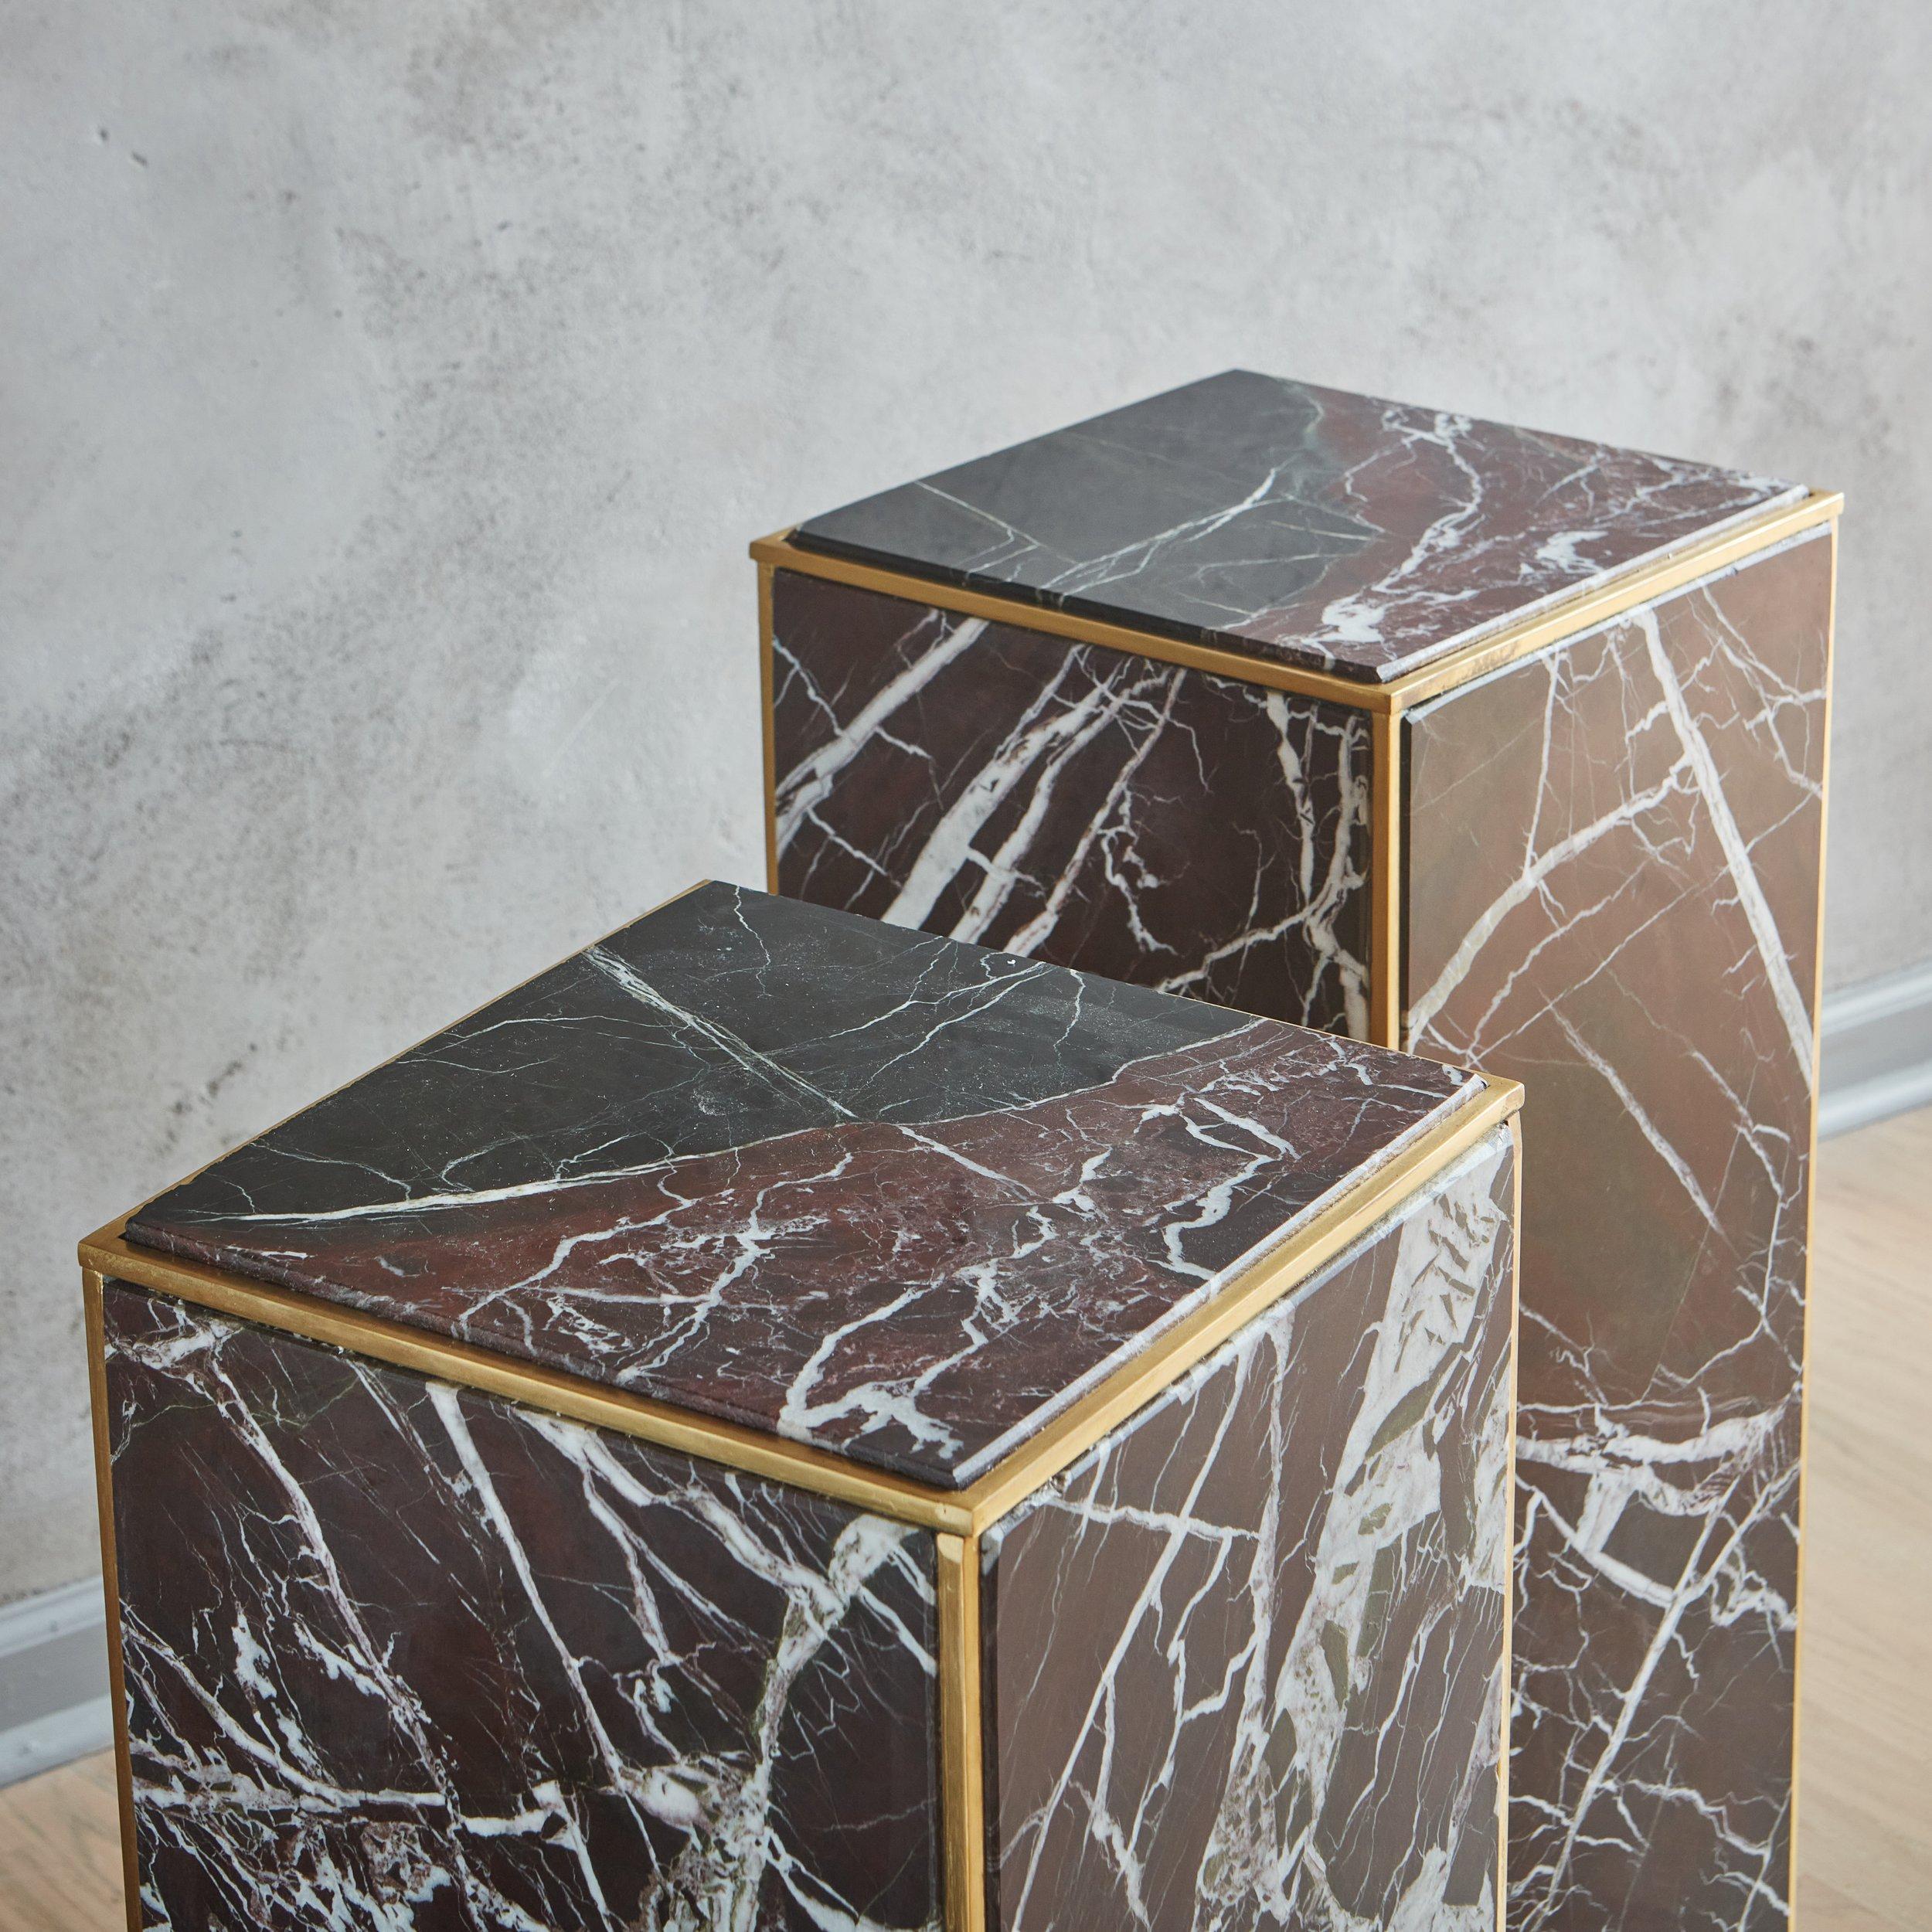 Italian Rouge Marble Pedestal Stand with Brass Trim, 20th Century - 2 Available For Sale